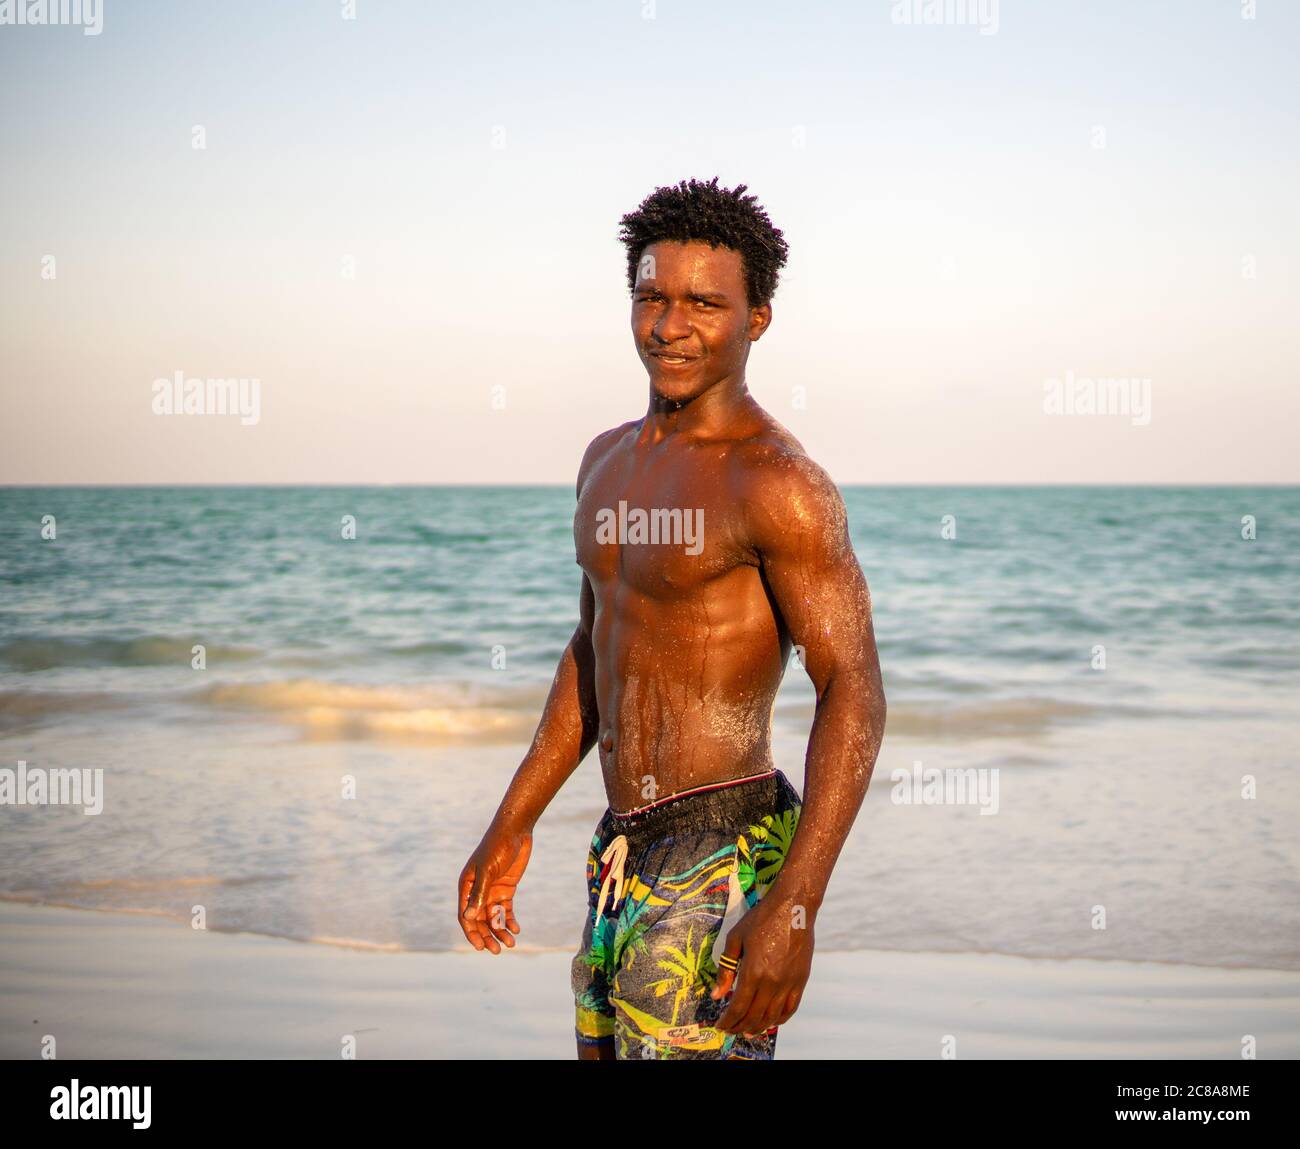 Young Attractive Muscular and Strong Athletic Black African Man Smiling at the White Sand Beach Stock Photo